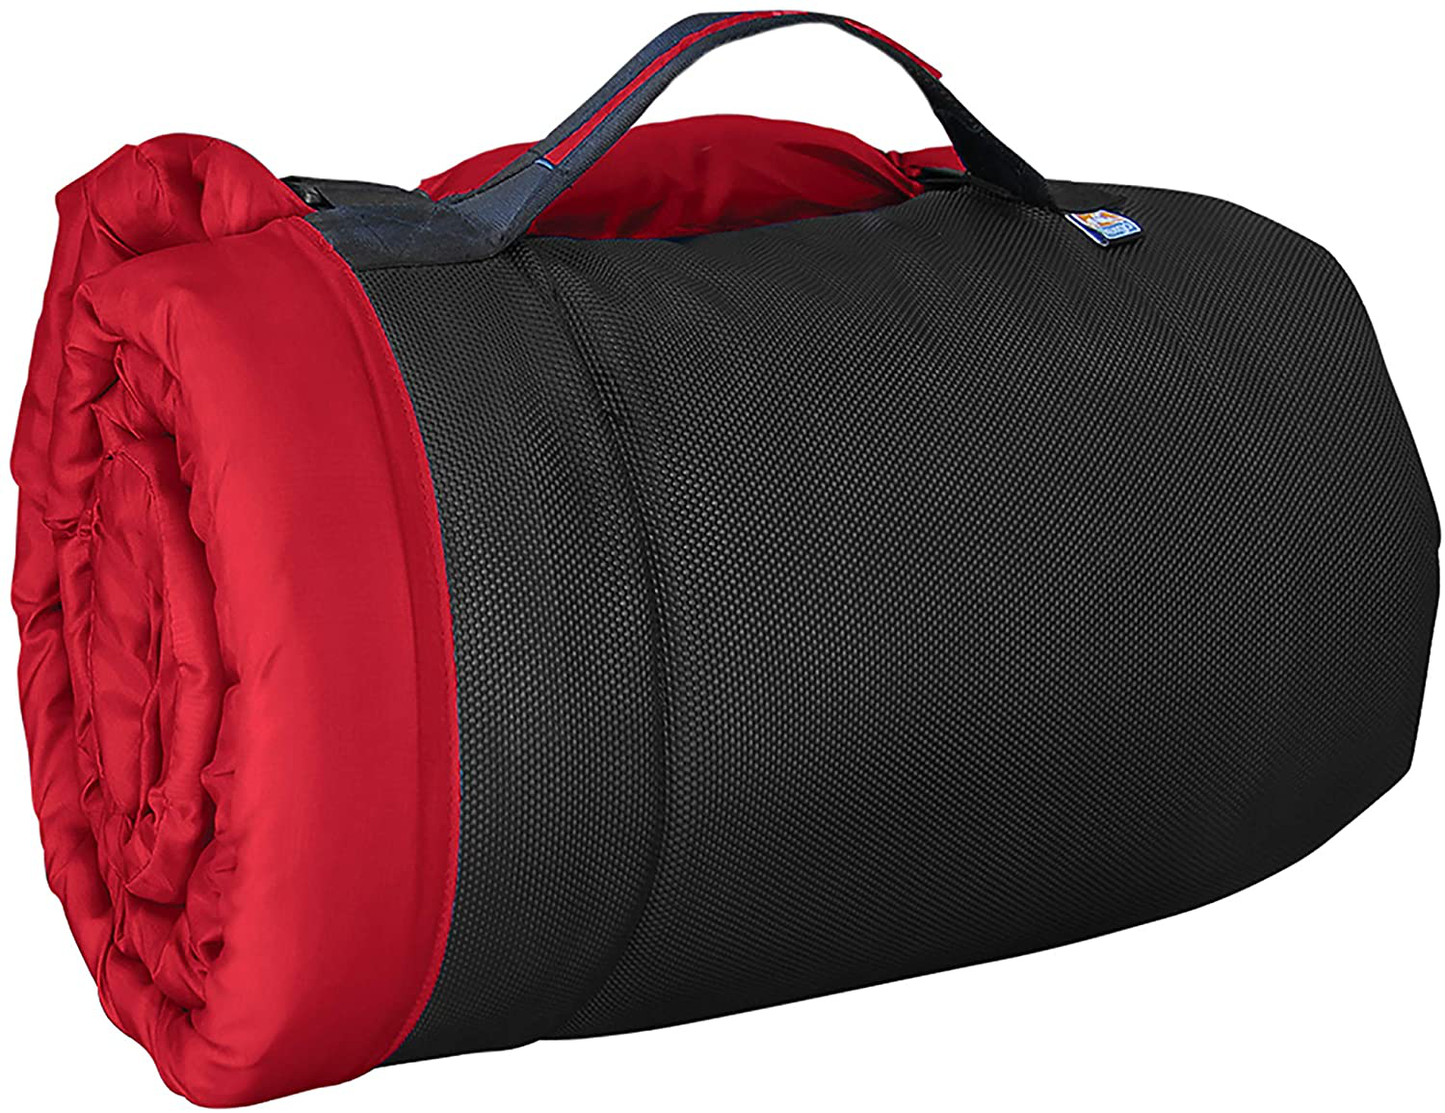 Kurgo Waterproof Dog Bed, Outdoor Bed for Dogs |Portable Bed Roll for Pets, Travel |Hiking, Camping, Wander Loft Dog Bed |Chili Red (Medium)